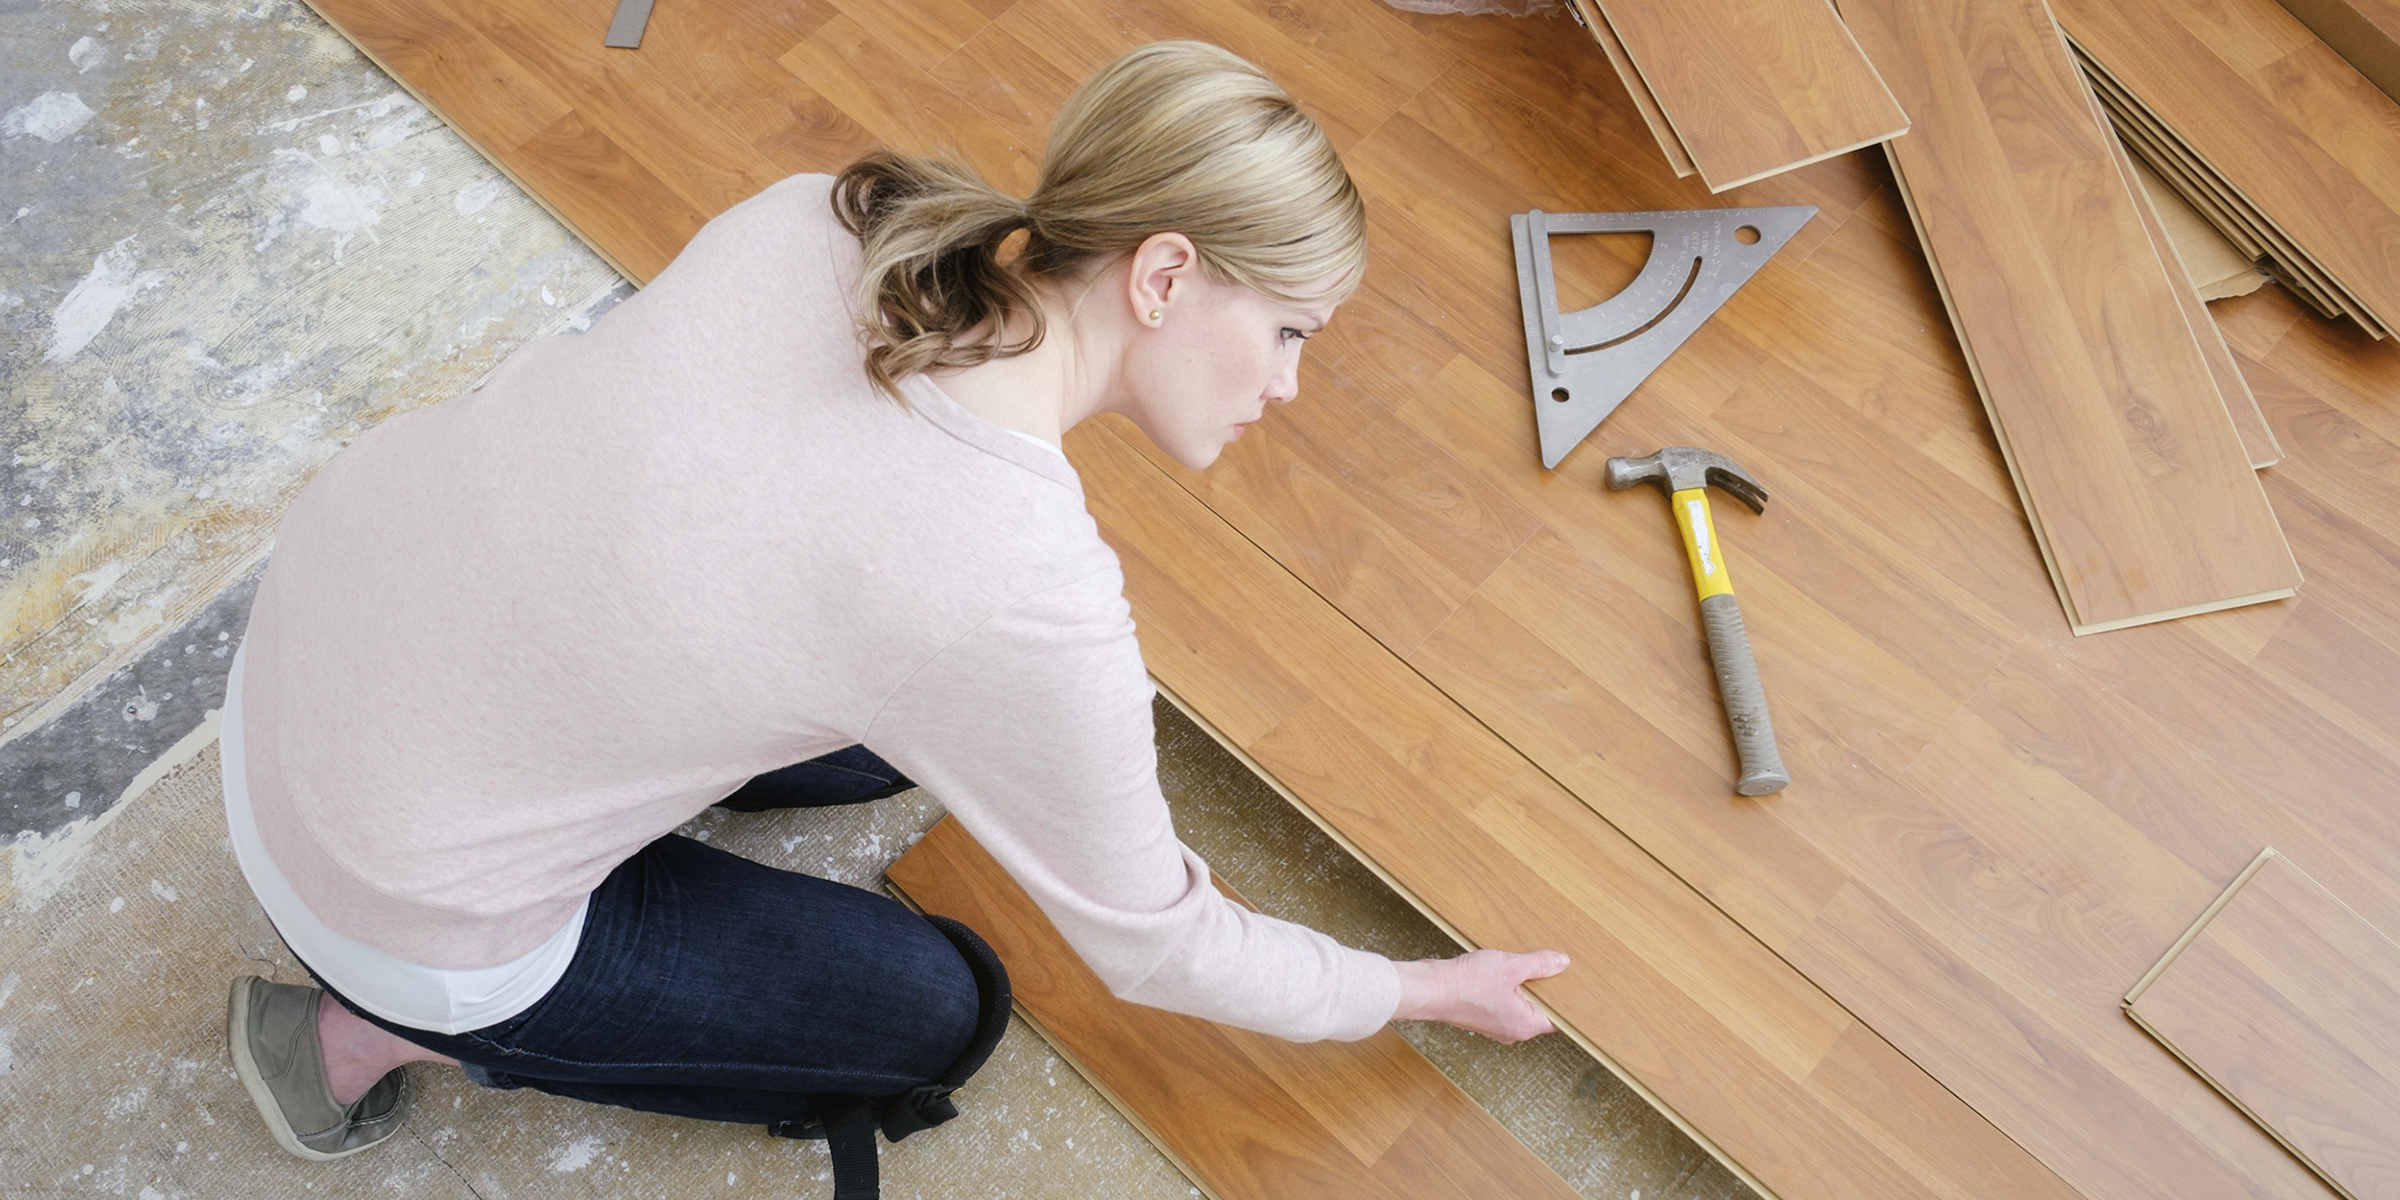 How to Cut Wood Flooring Already Installed